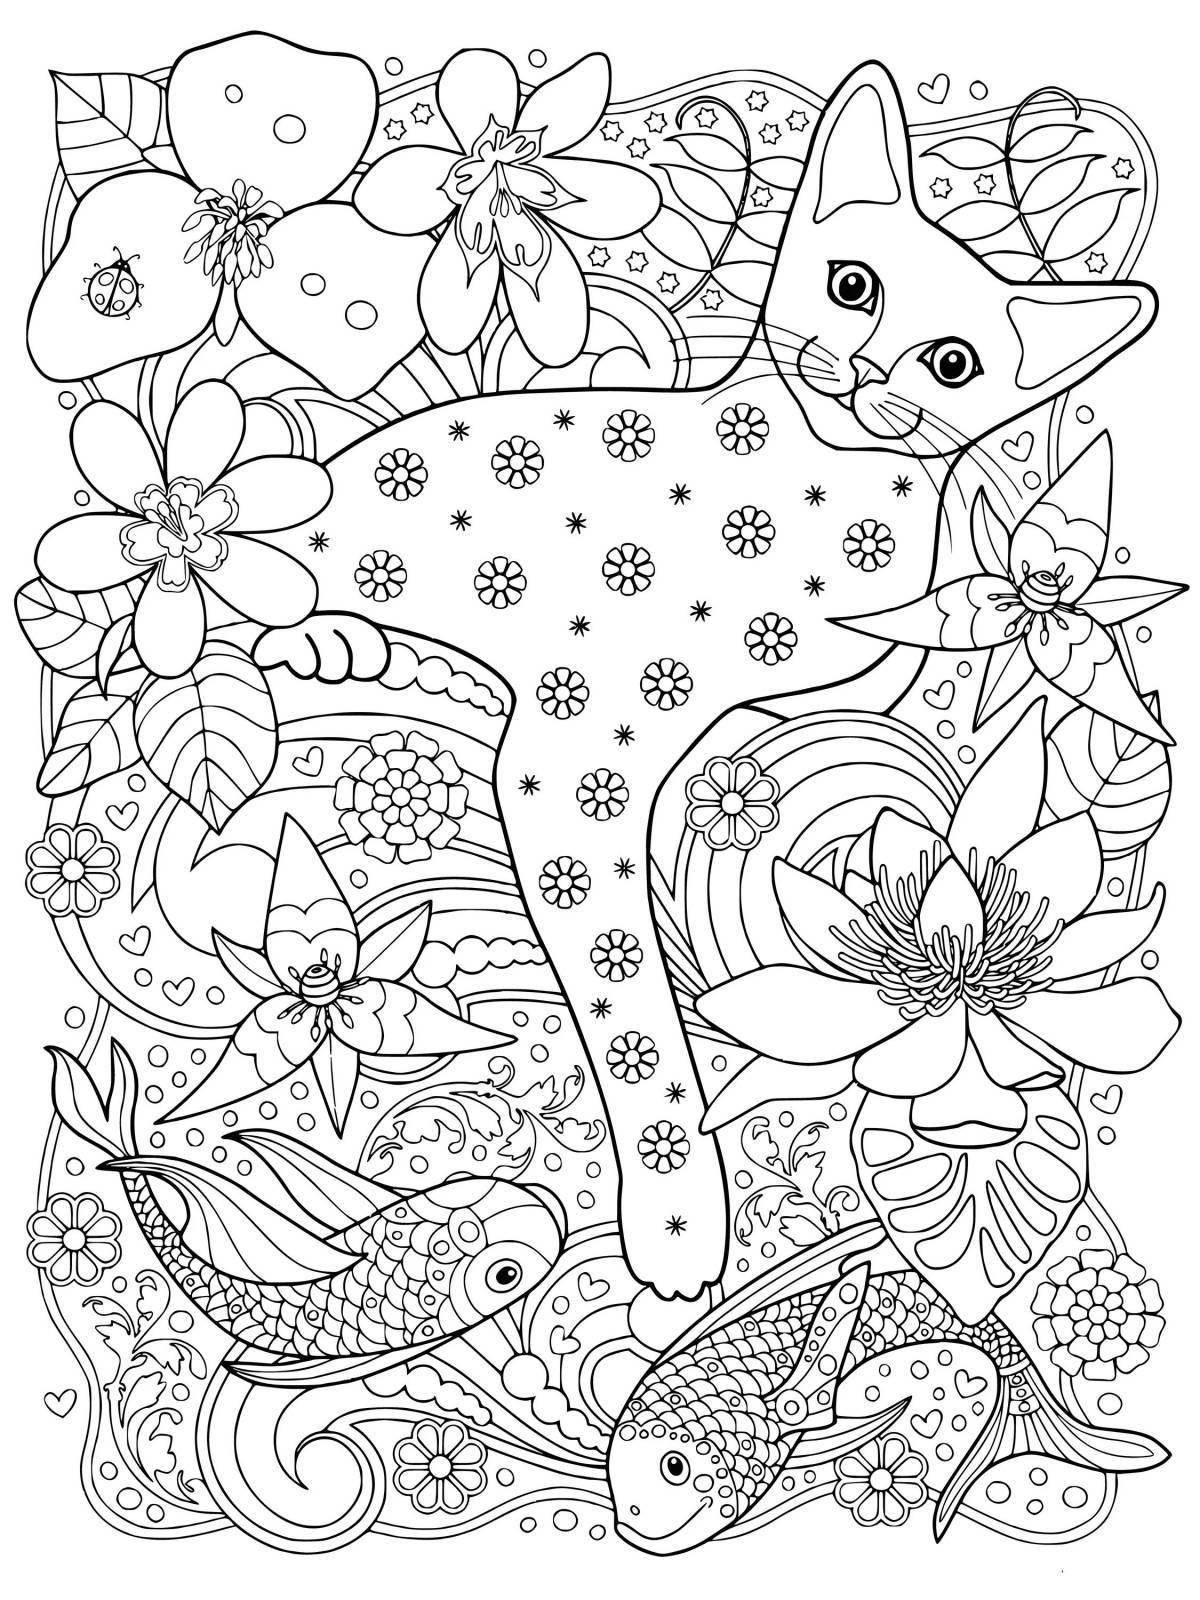 Awesome anti-stress cat coloring book for girls